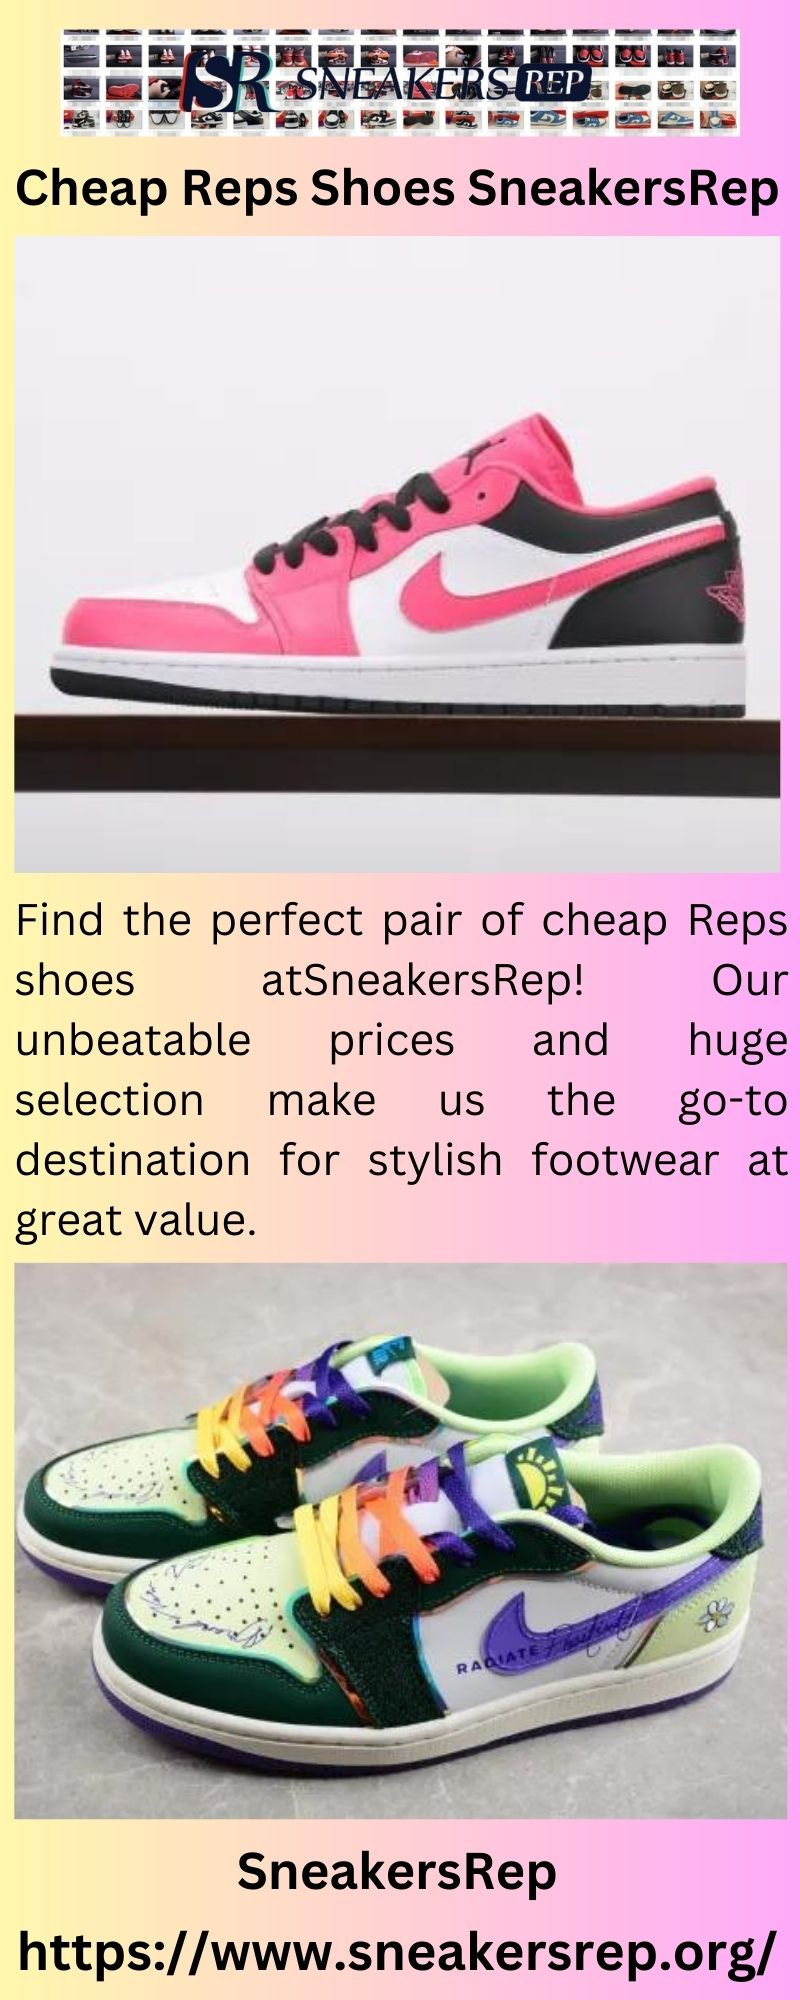 Cheap Reps Shoes |SneakersRep